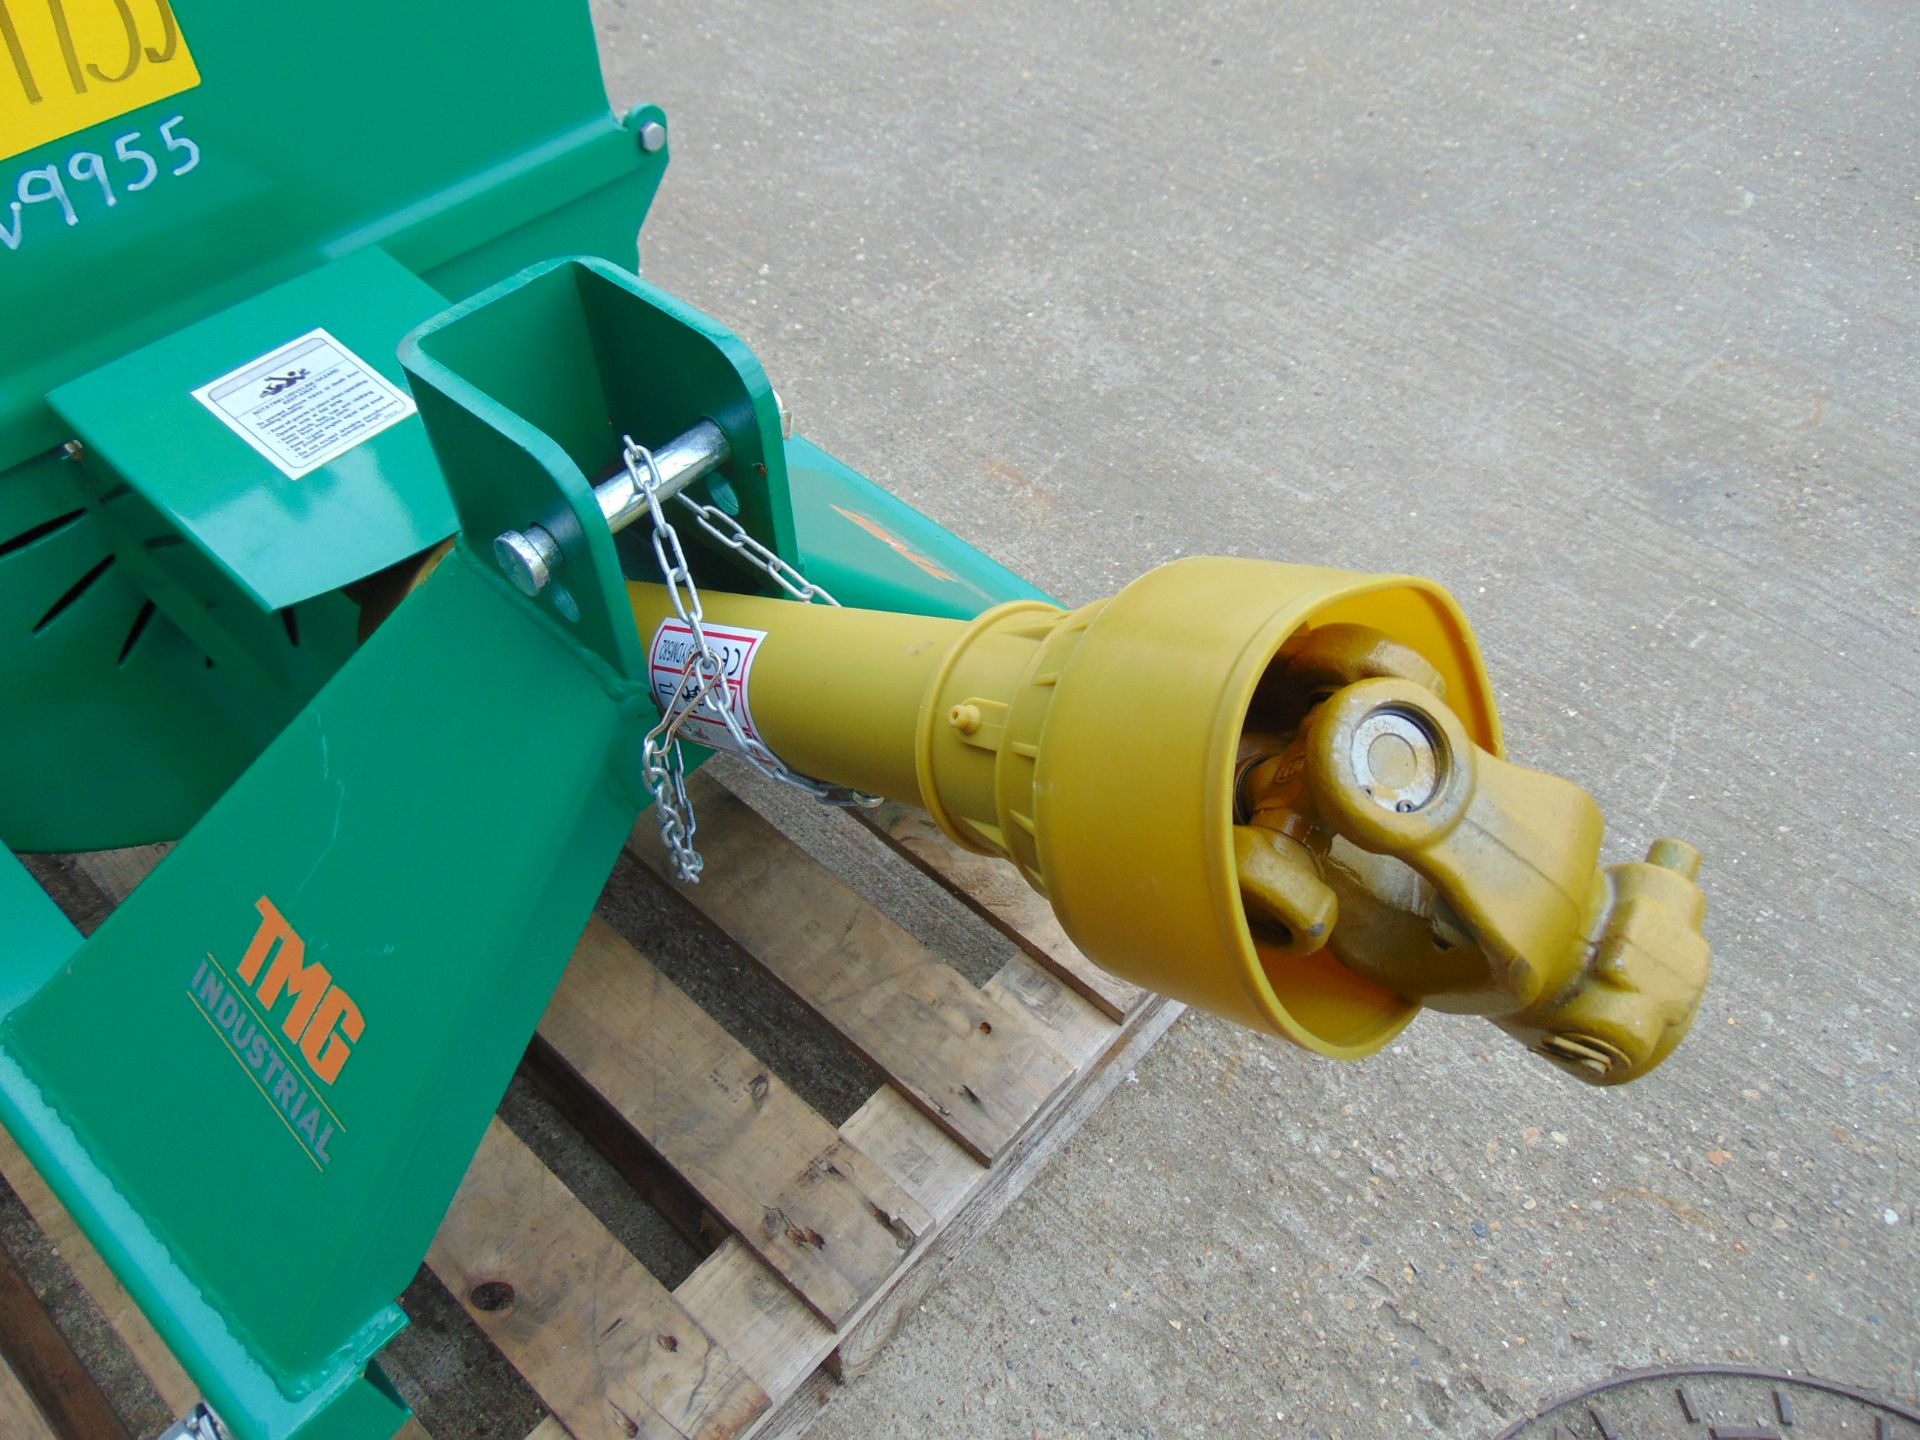 TMG-42SWC 4" PTO Driven Wood Chipper for 45-70Hp Tractors - Image 5 of 8